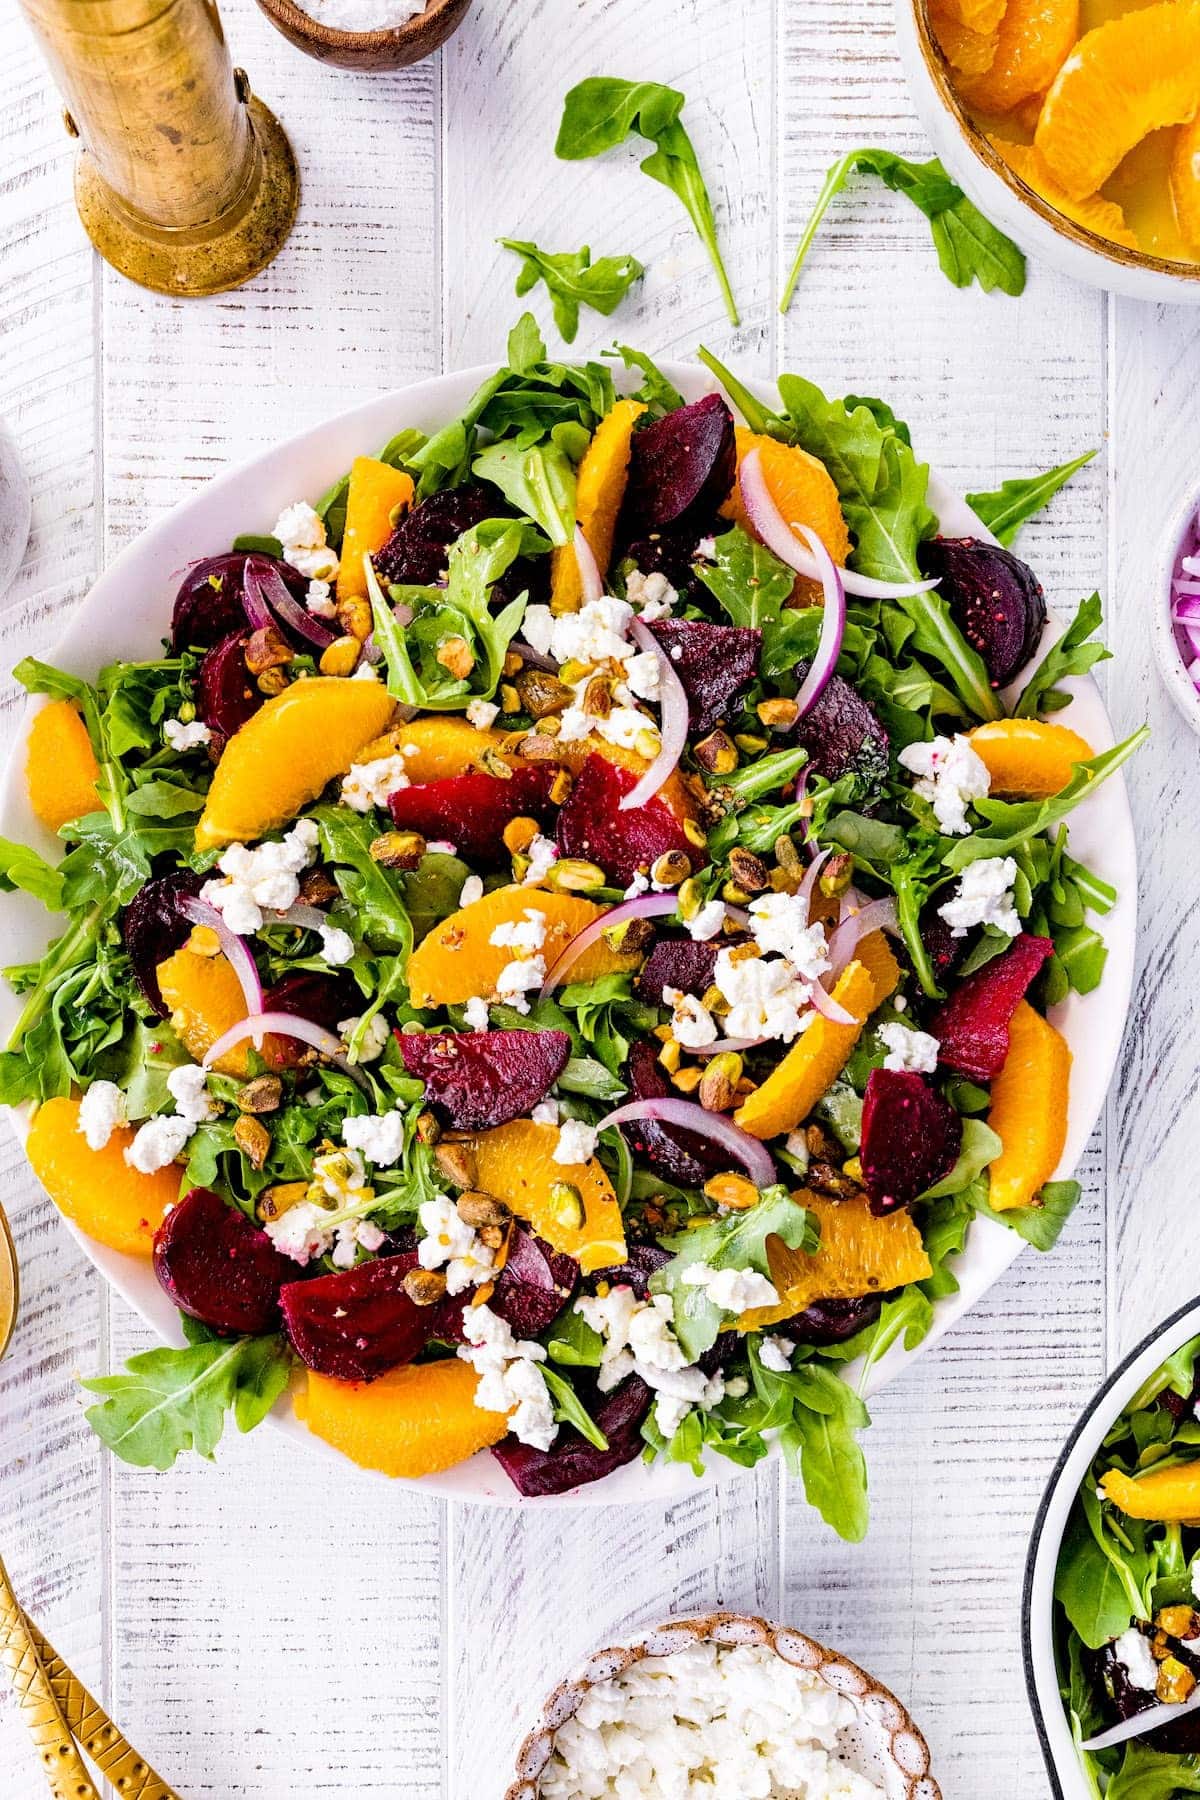 Salad on a bowl with mixed beets, peppery arugula, orange, and goat cheese.